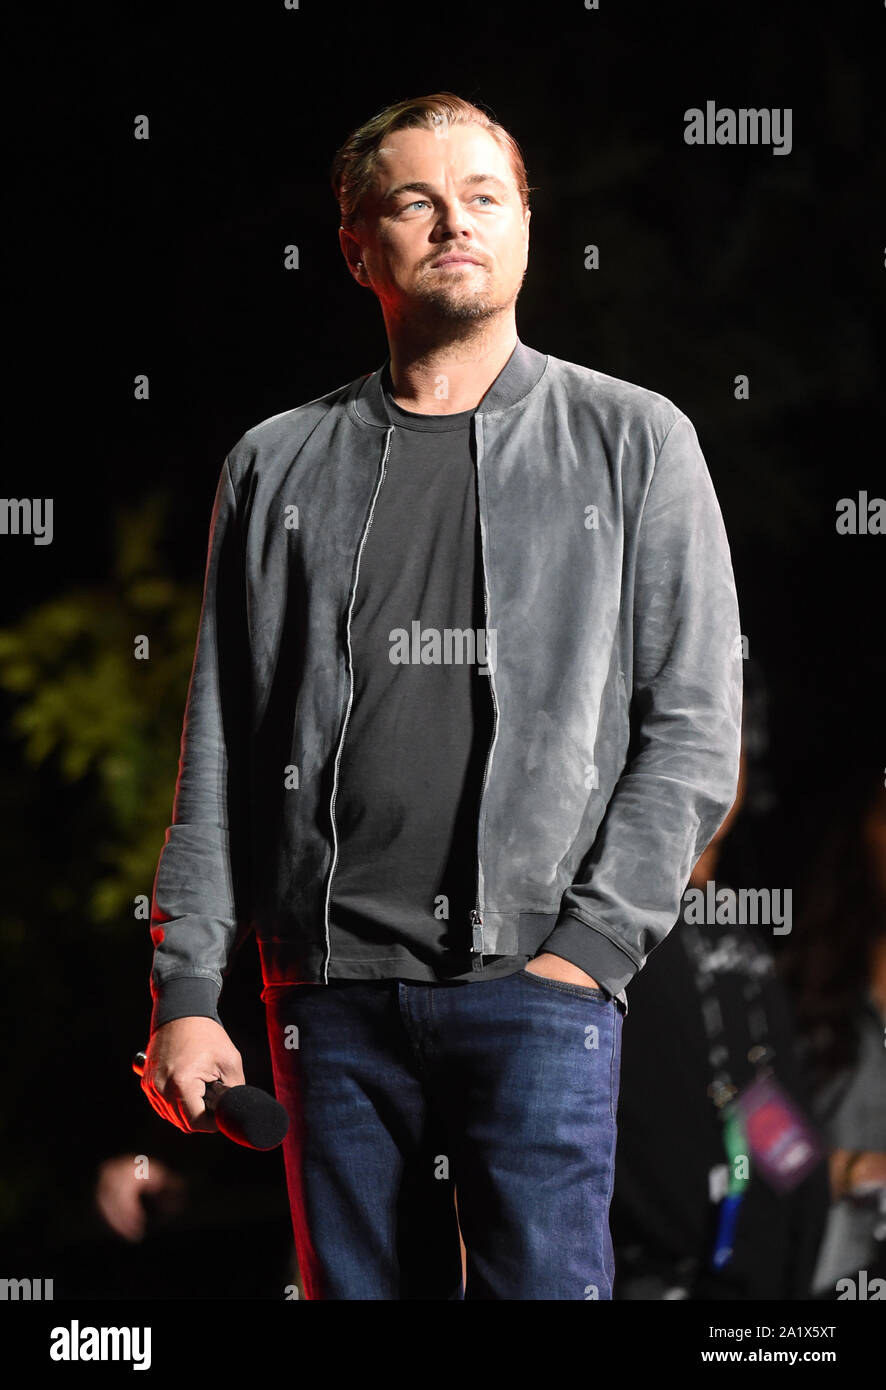 New York, NY, USA. 28th Sep, 2019. Leonardo DiCaprio at the 2019 Global Citizen Festival: Power The Movement in Central Park in New York on September 28, 2019. Credit: John Palmer/Media Punch/Alamy Live News Stock Photo